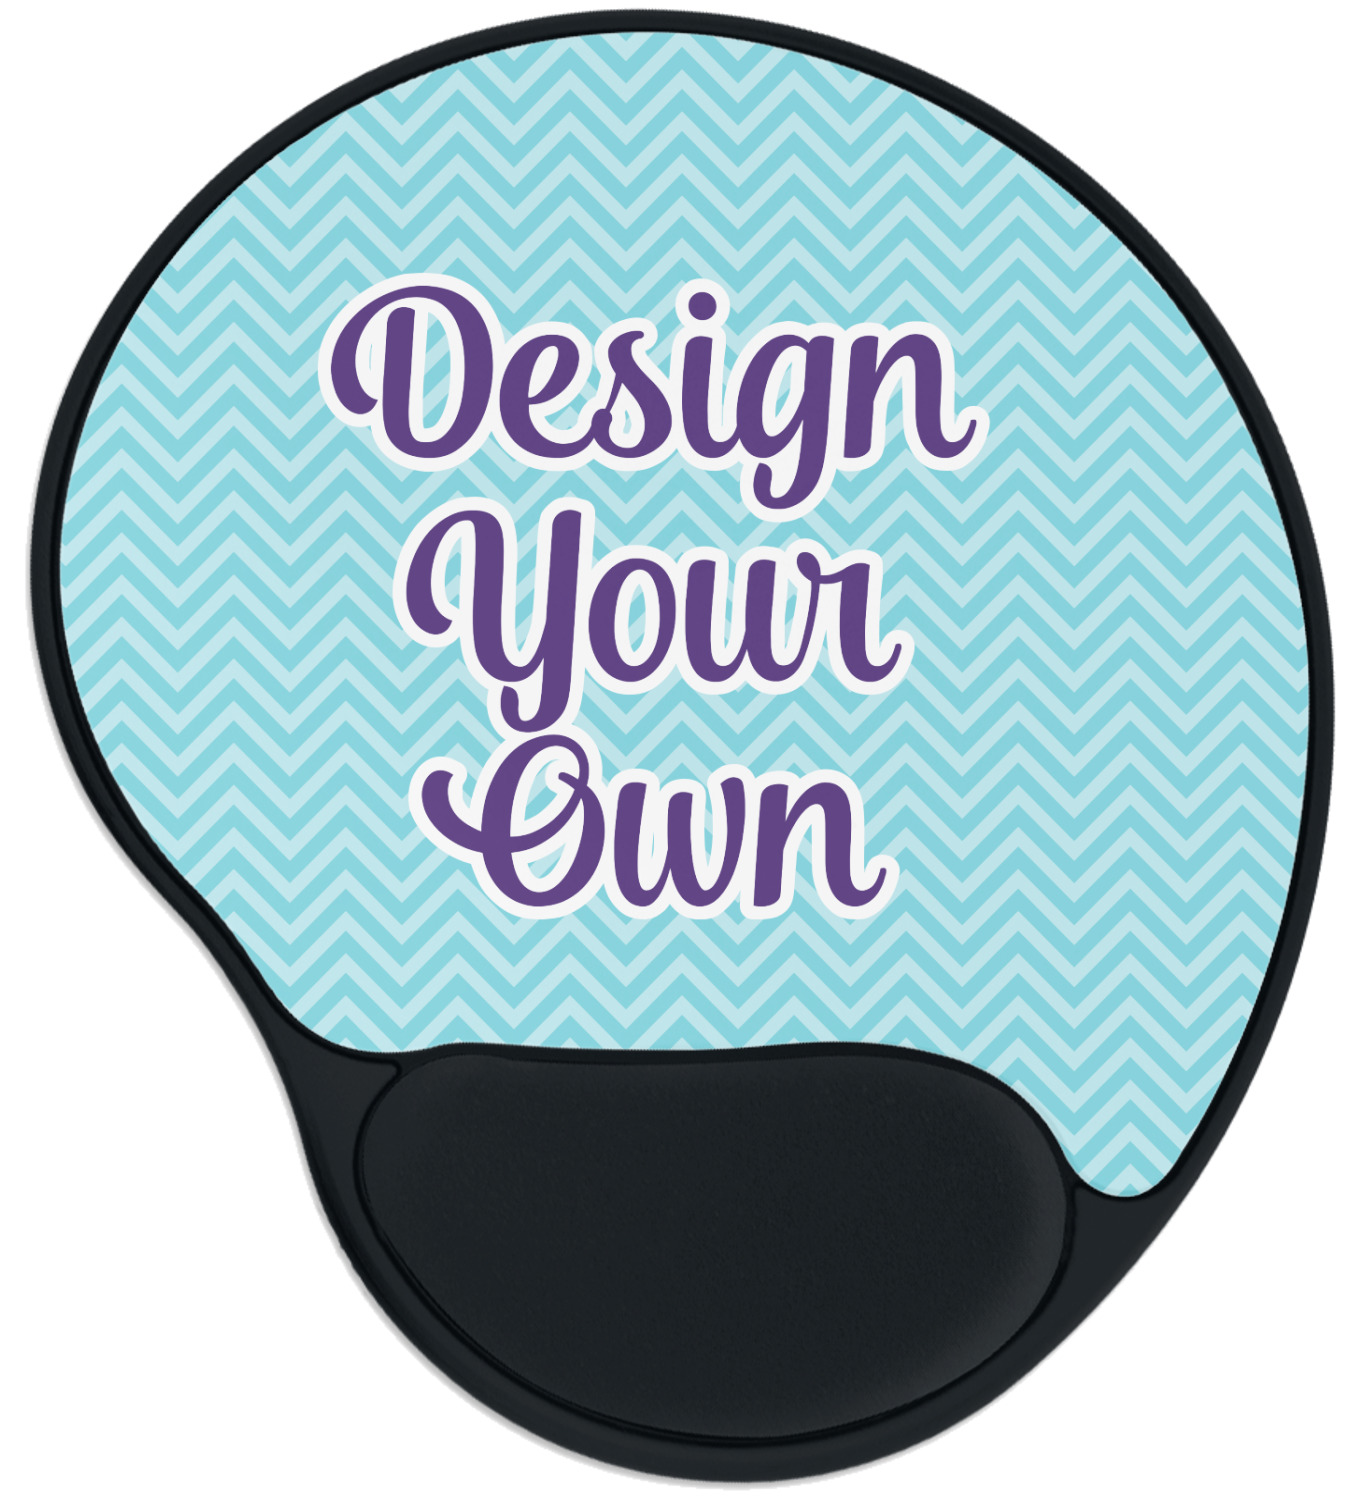 PERSONALISED OWN MOUSEPAD Your own photo pictures text logo image Create own 